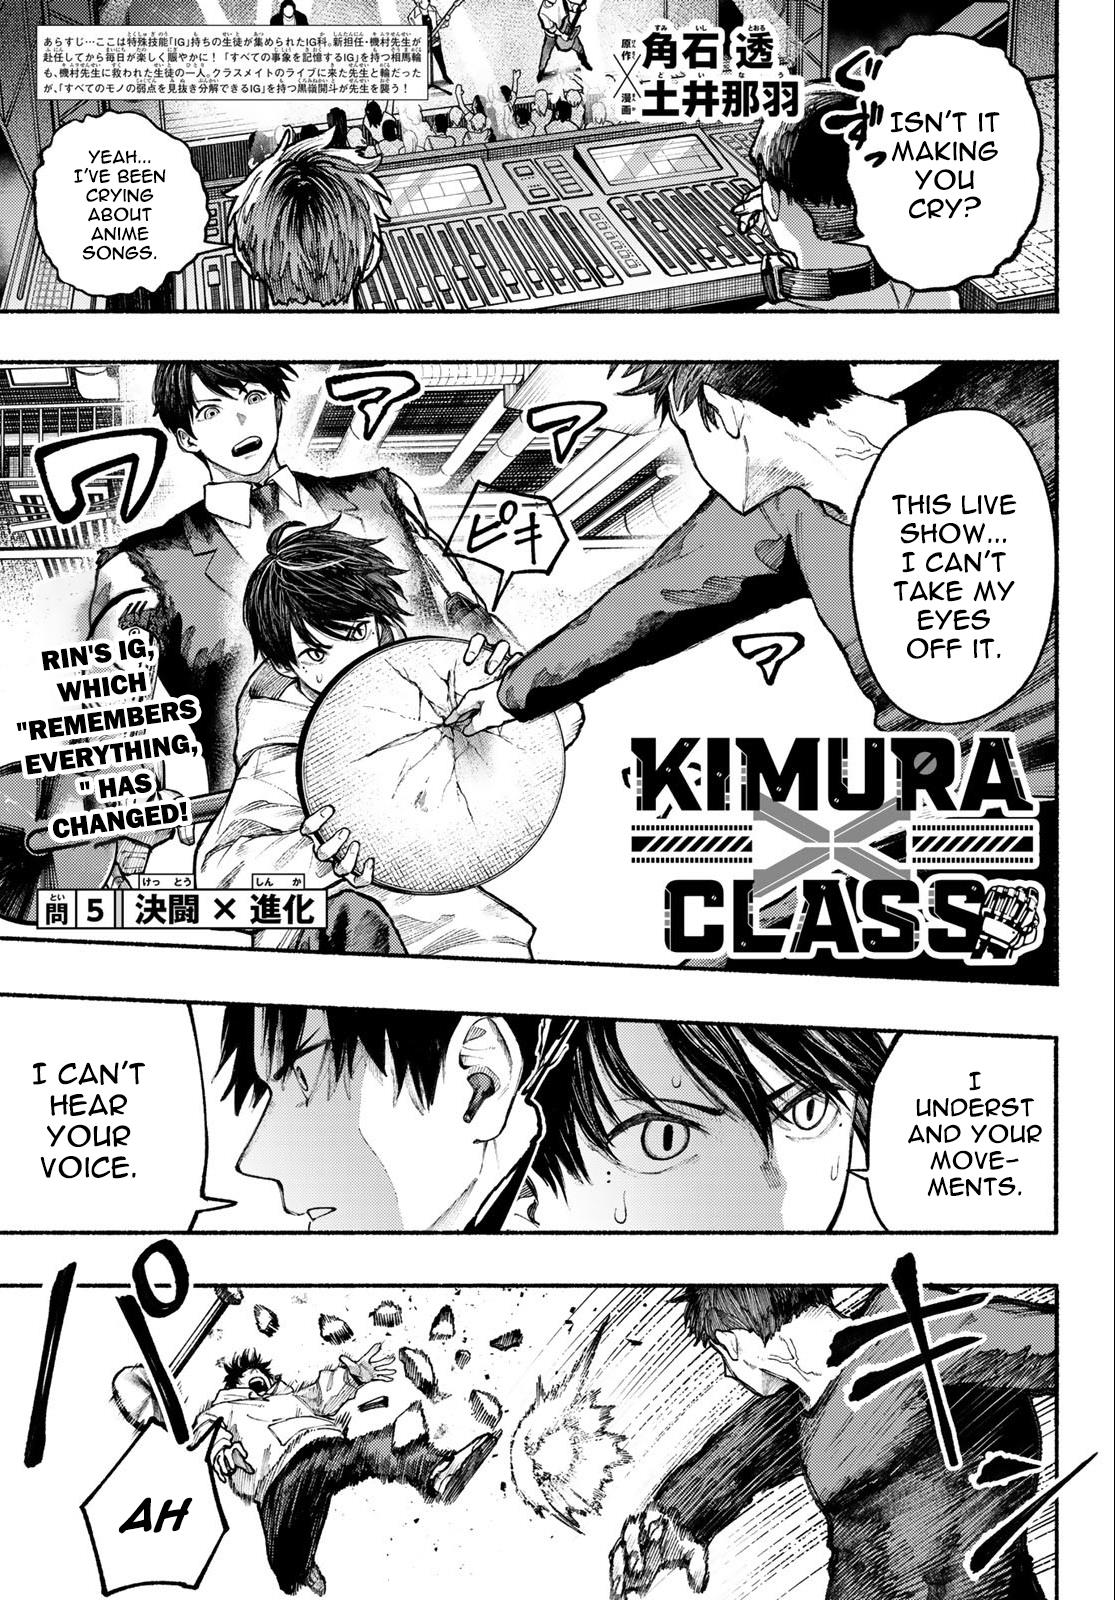 Kimura X Class Vol.1 Chapter 5: Duel × Evolution - Picture 2